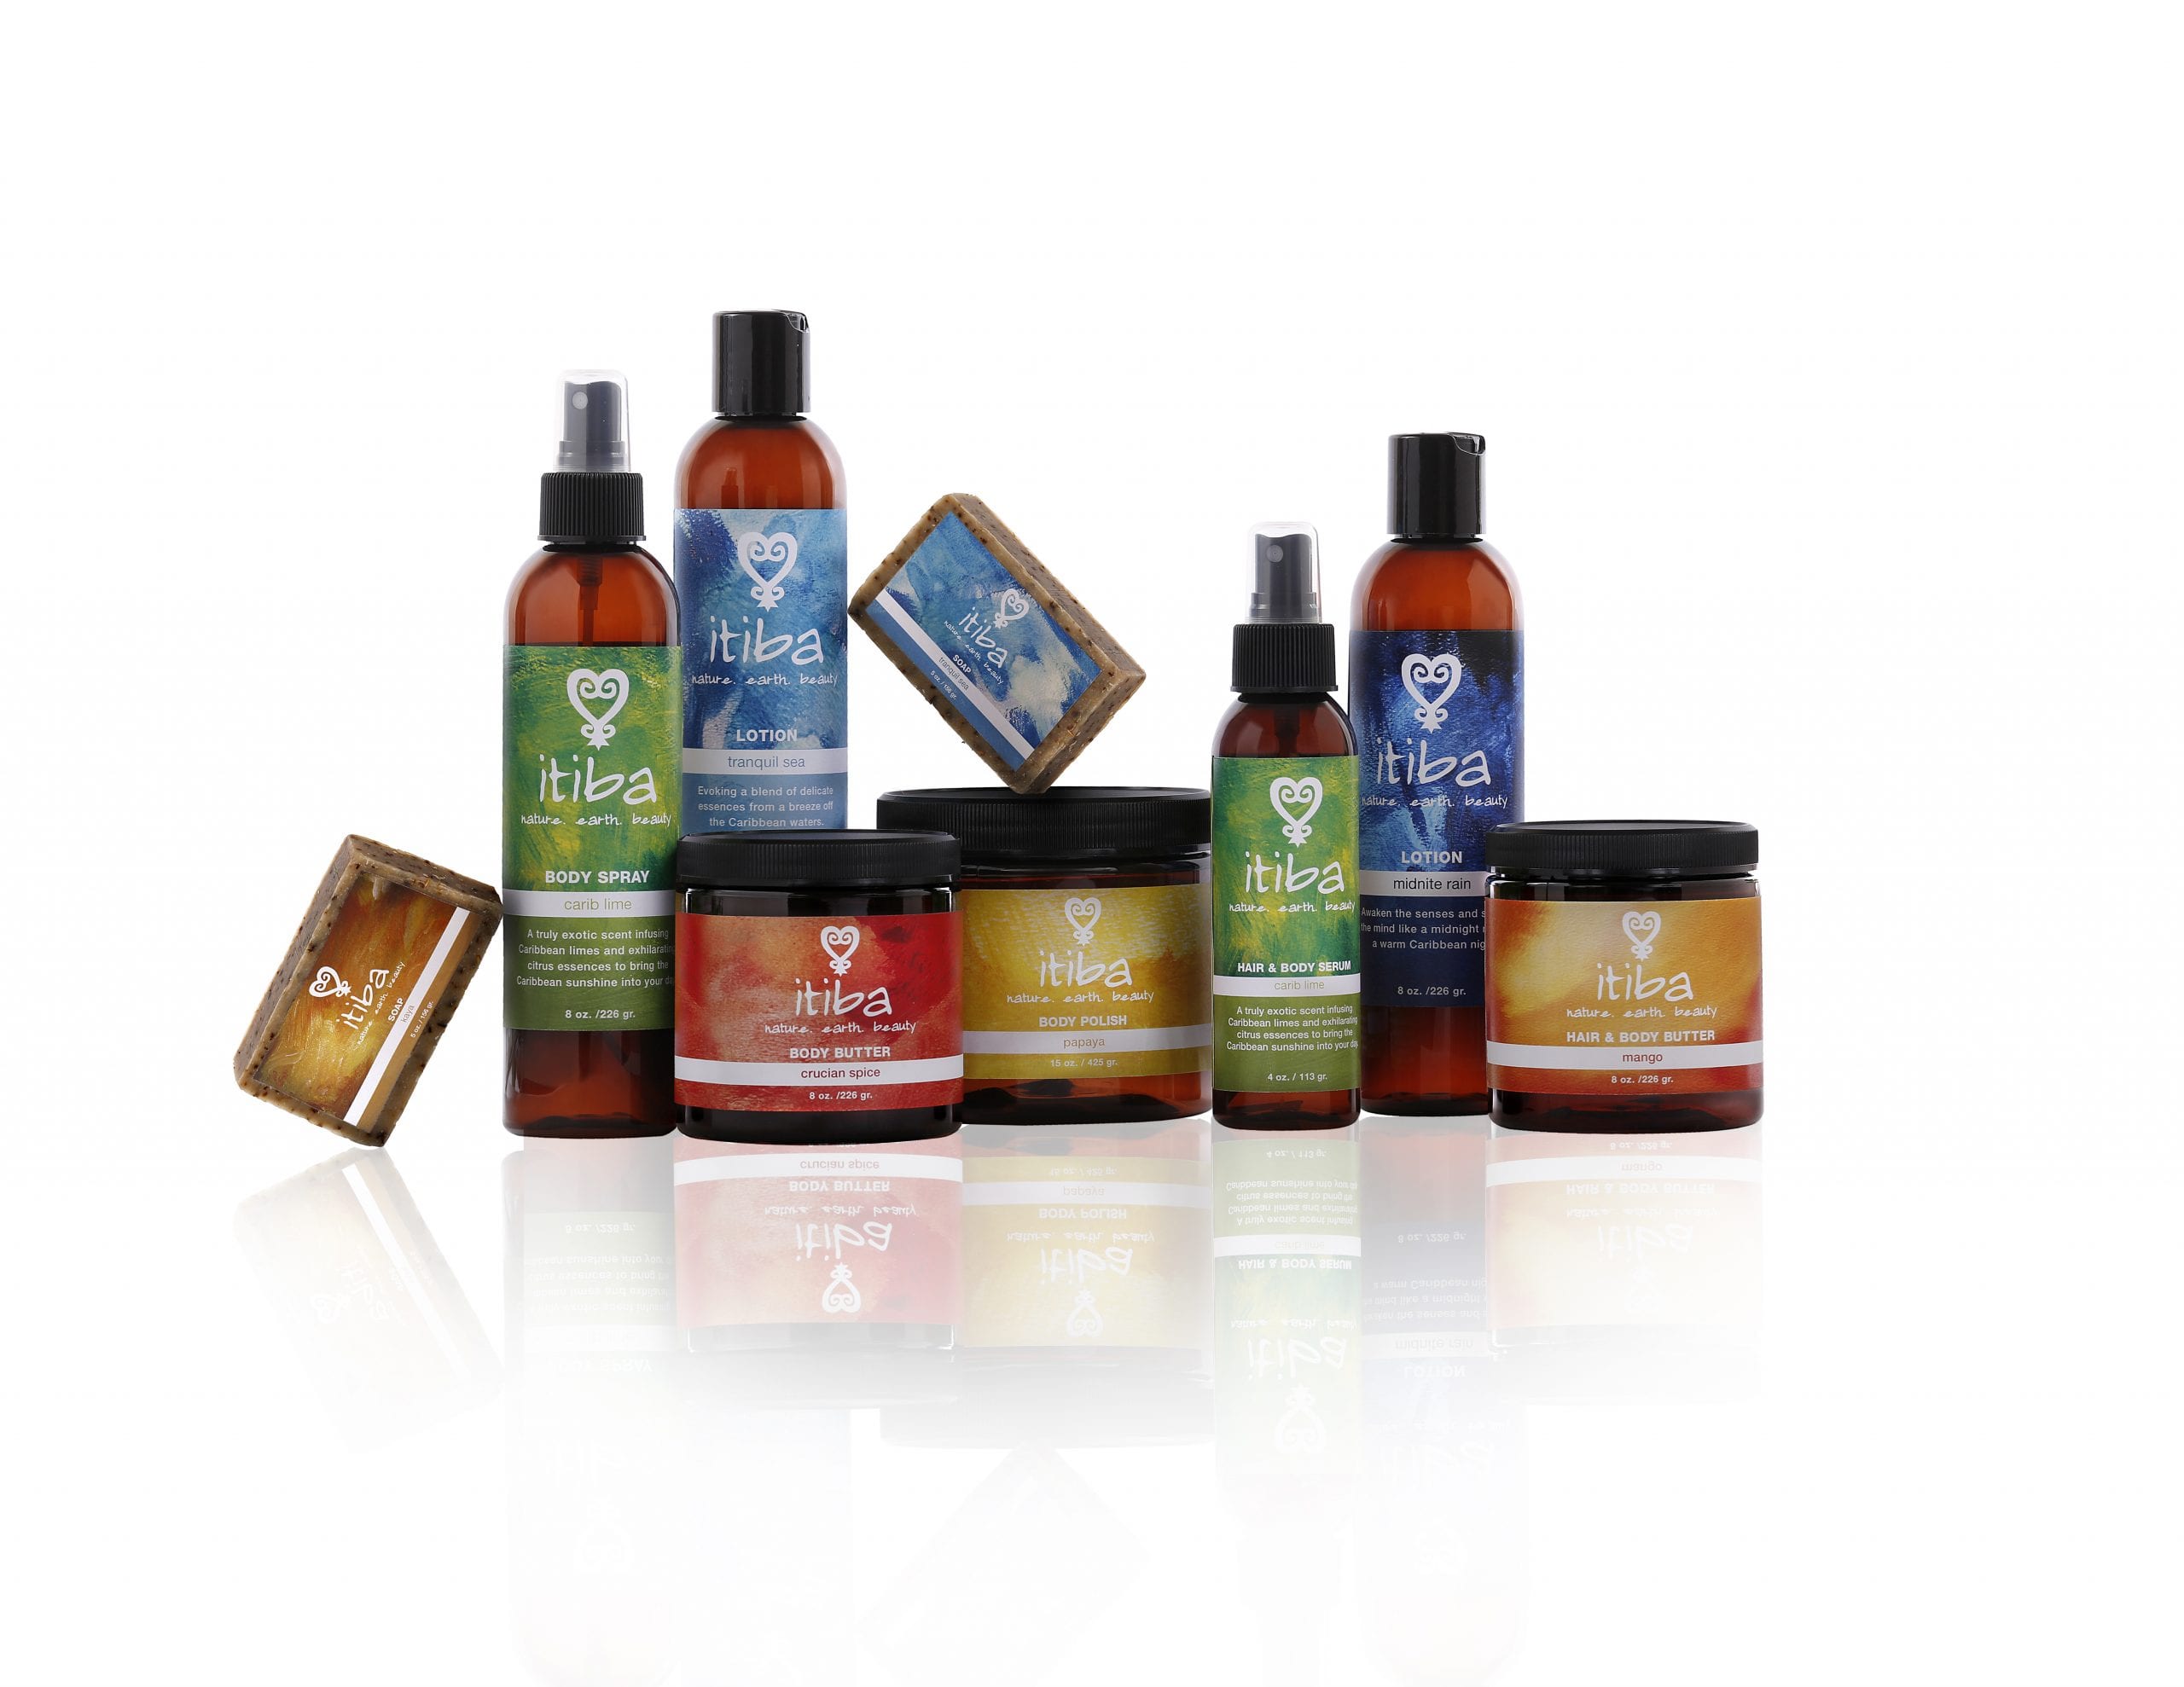 Itiba beauty collection - lotion, body butter and polish, hair and body serum, essential oil soaps